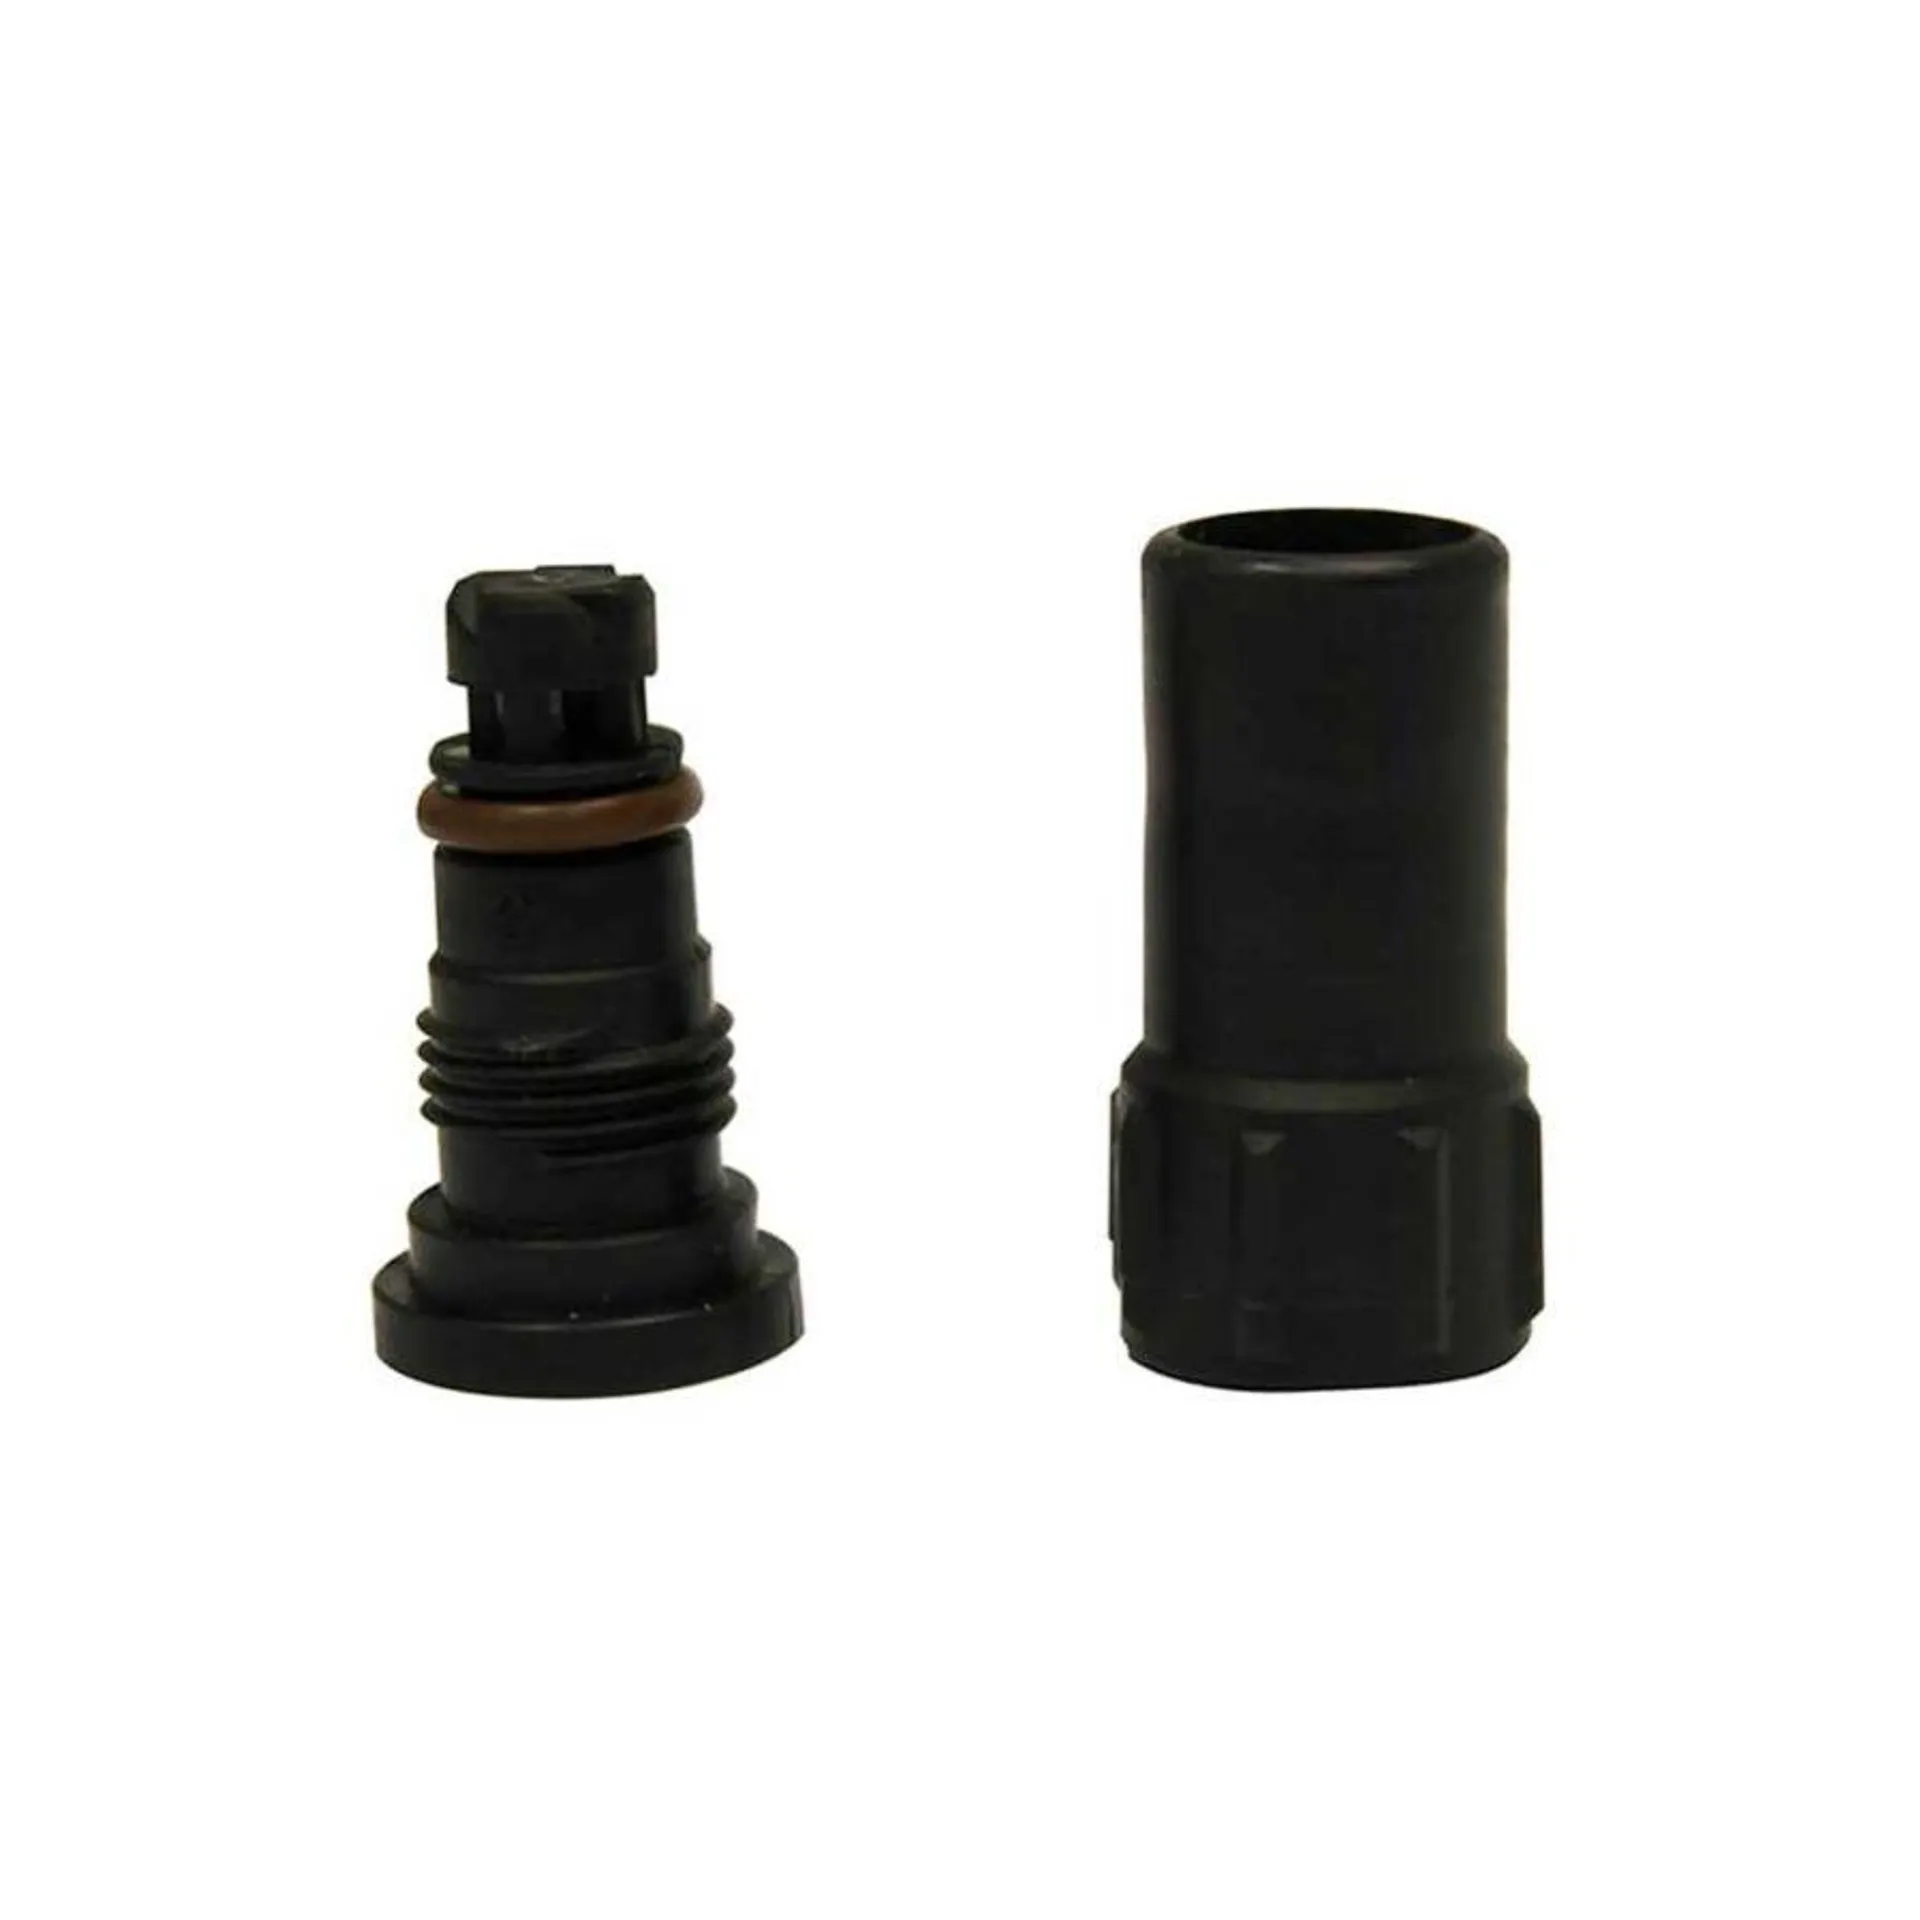 Chapin® Nozzle - Adjustable Nozzle For Backpack Sprayers